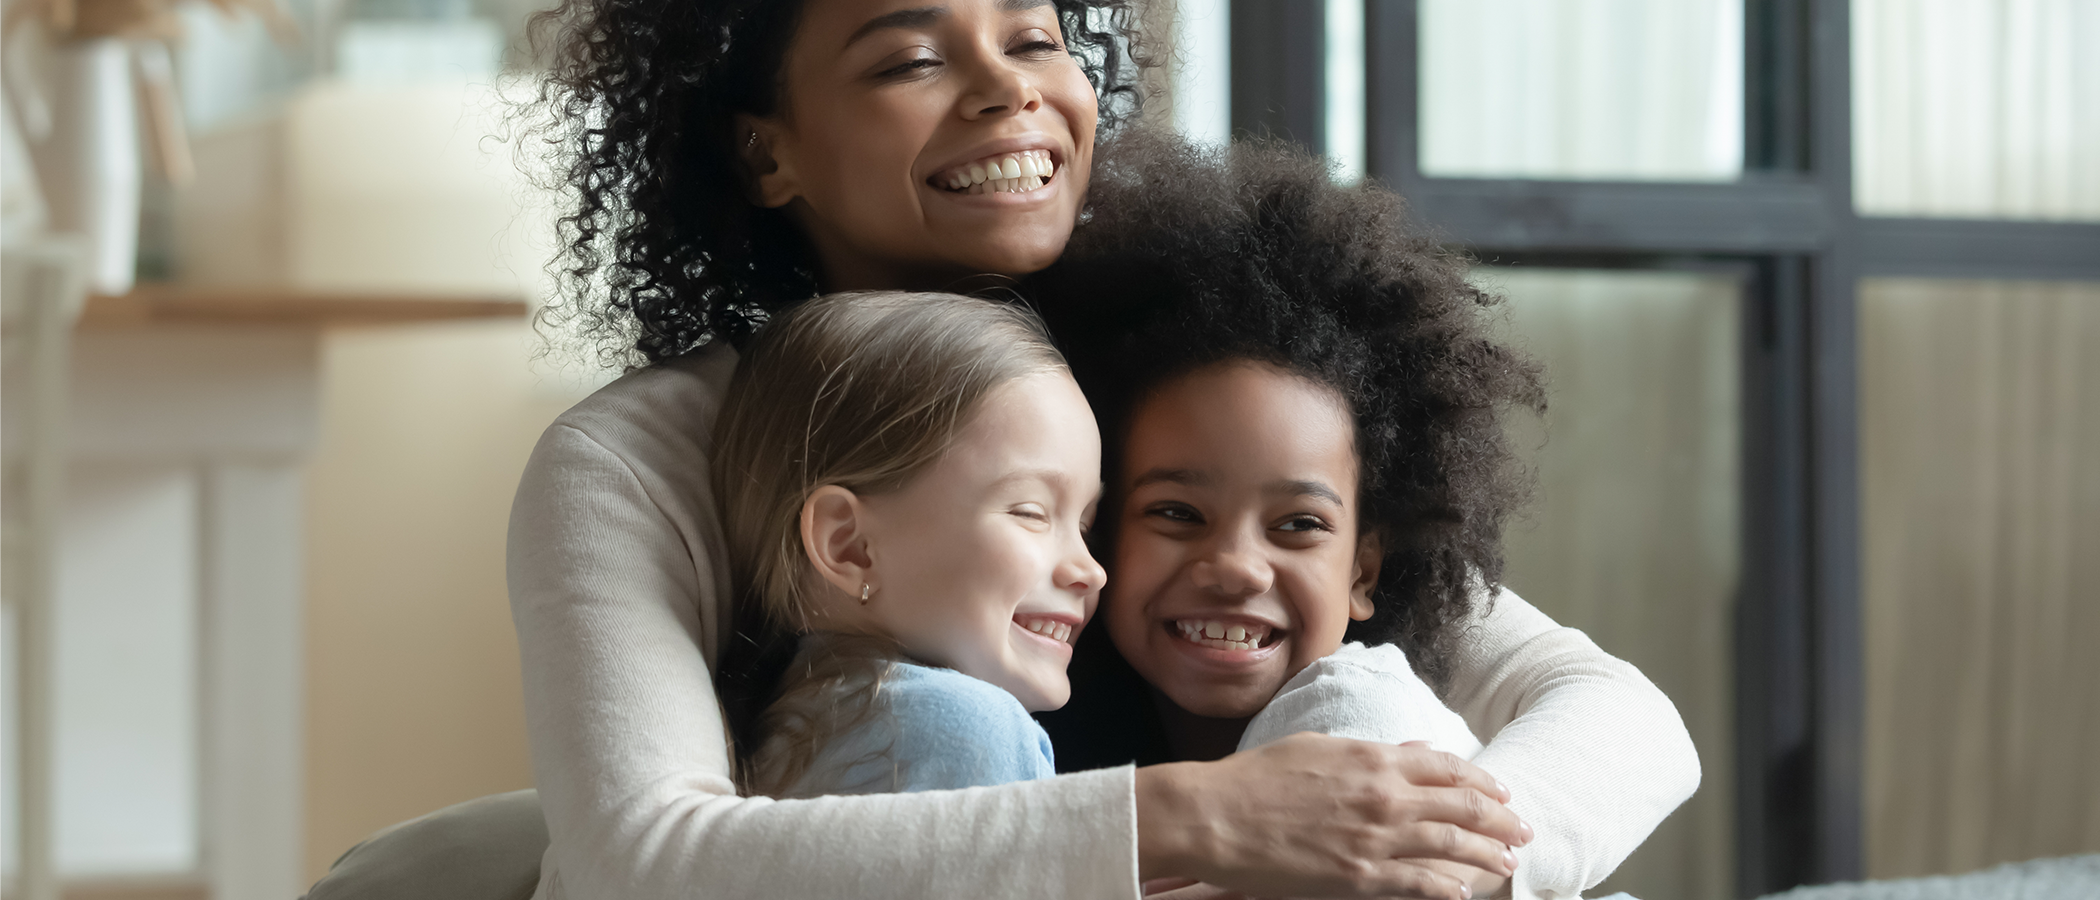 Our Support Services help keep kids from going into the child welfare system. Families are provided short-term assistance, education and linkage to community support and services.